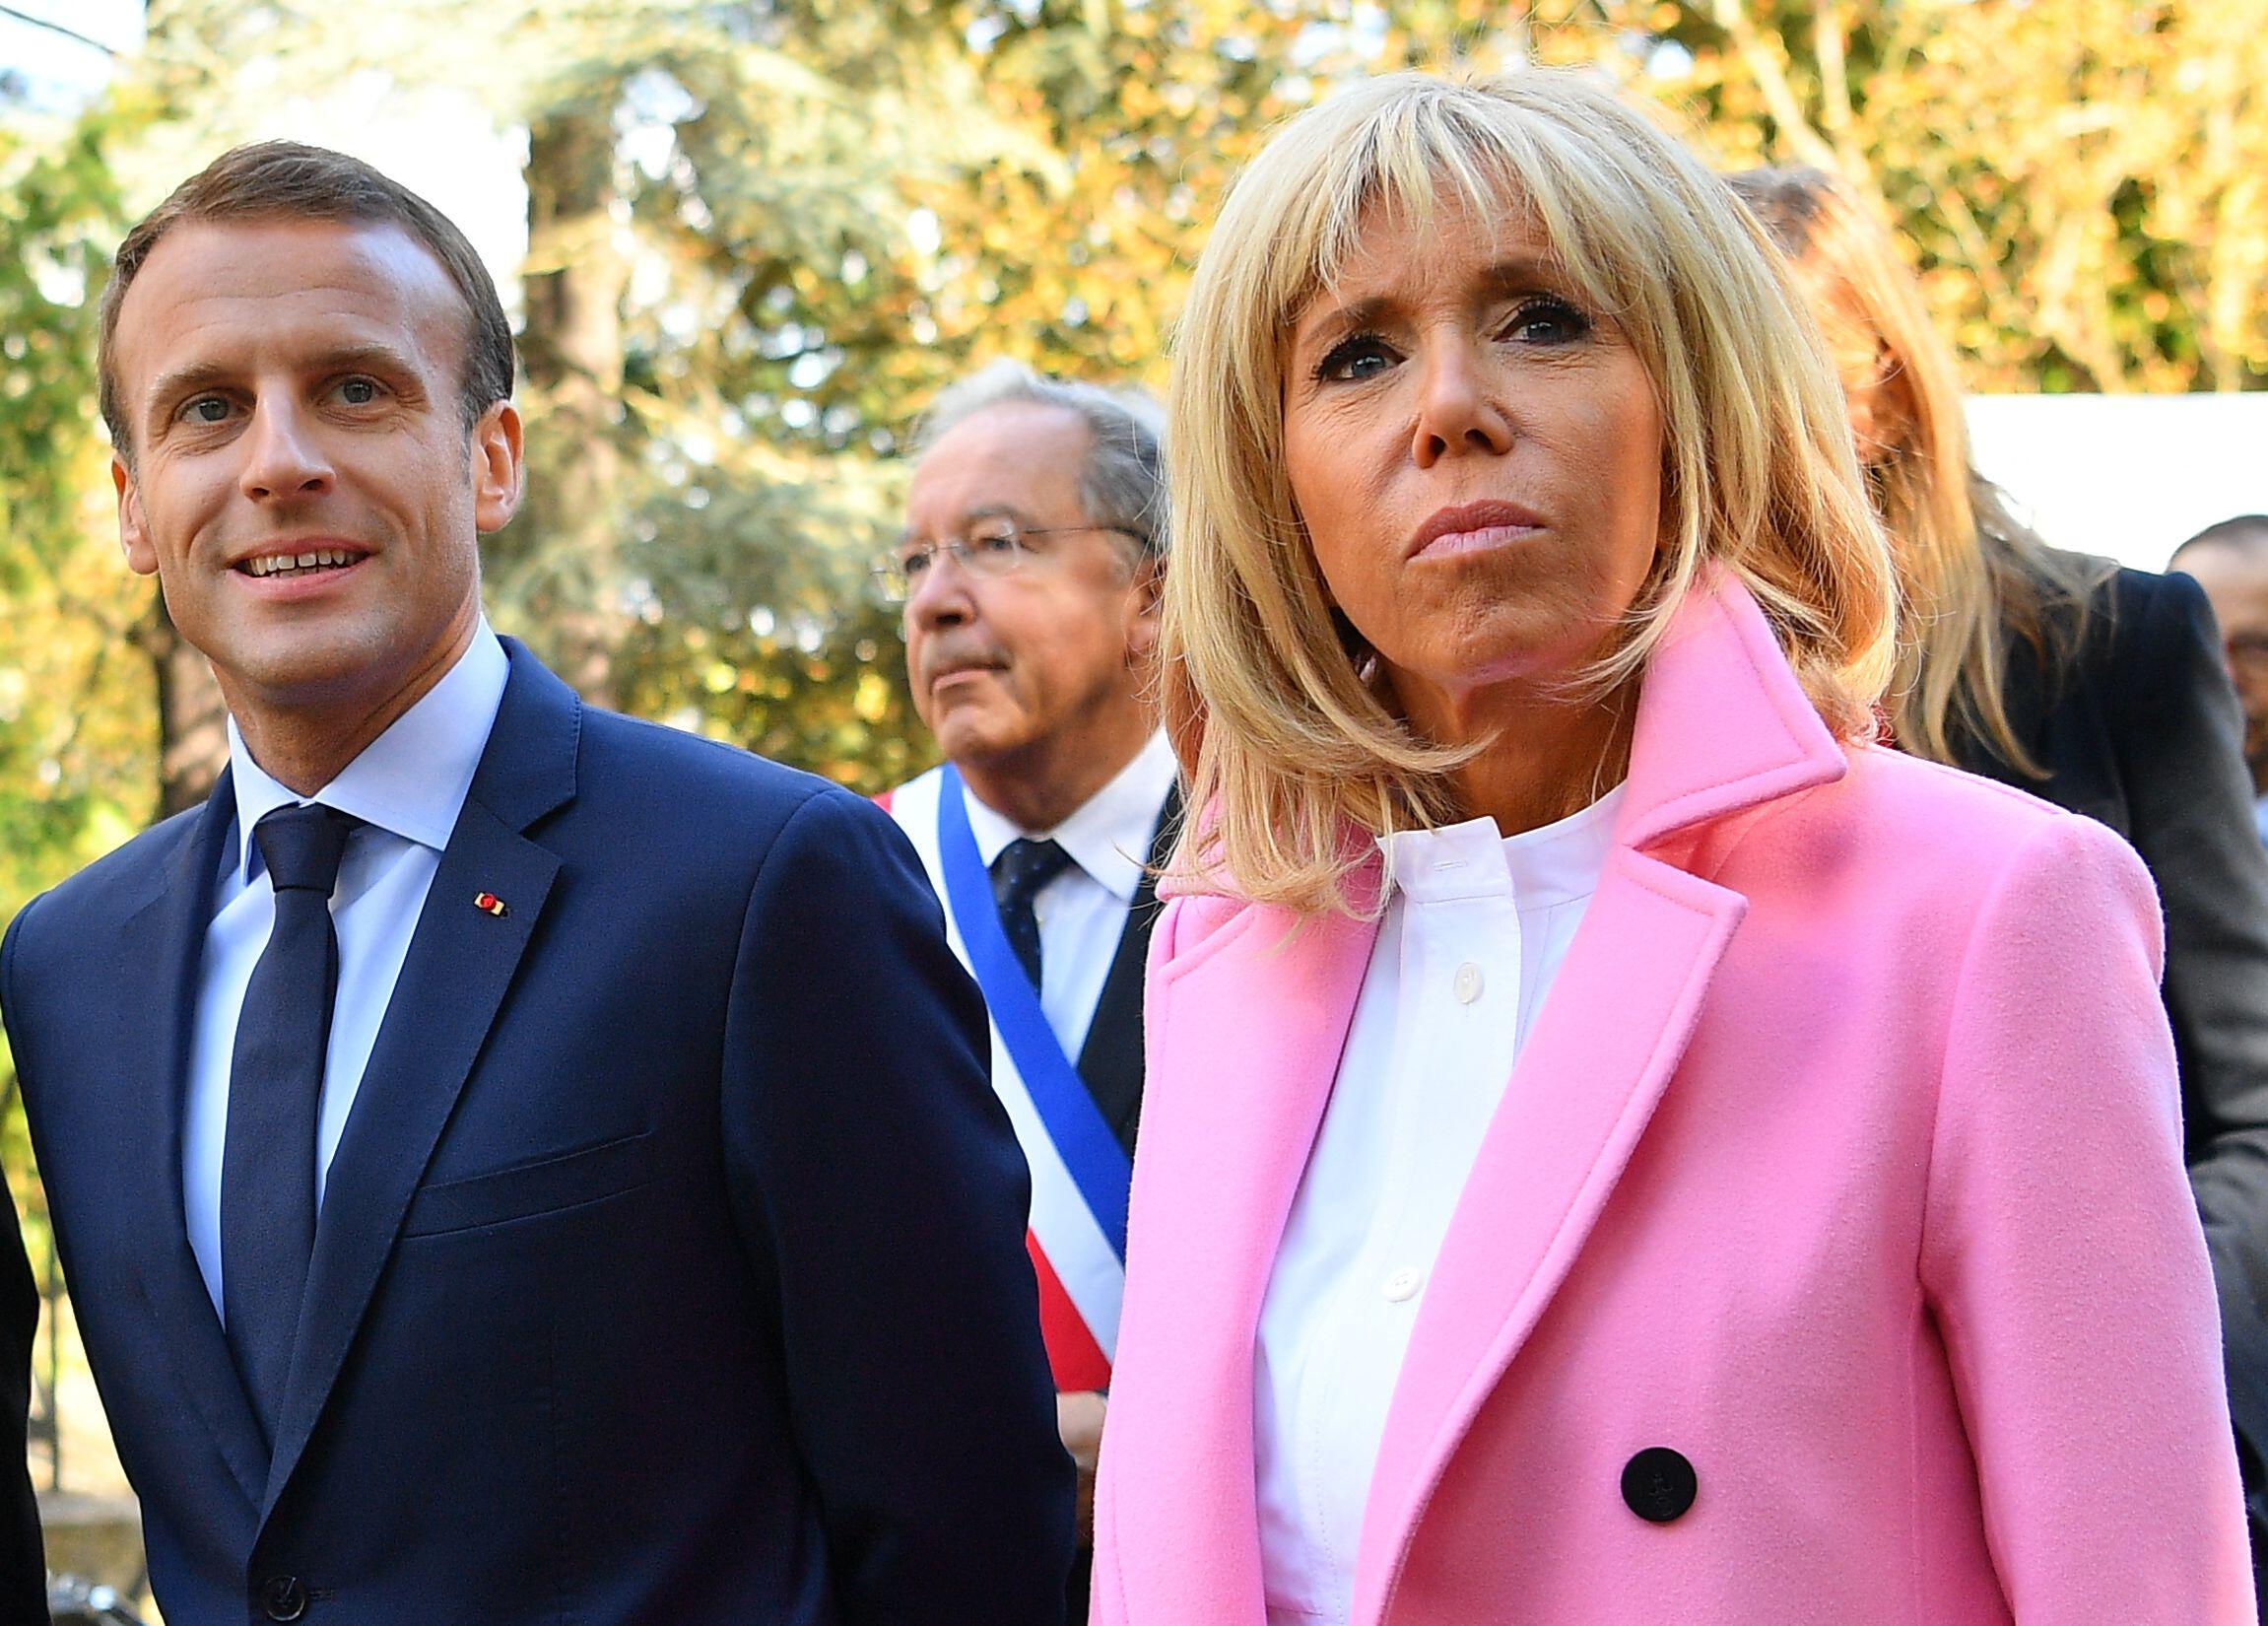 French president Emmanuel Macron told wife he'd marry her when she was 41 and he was just 17